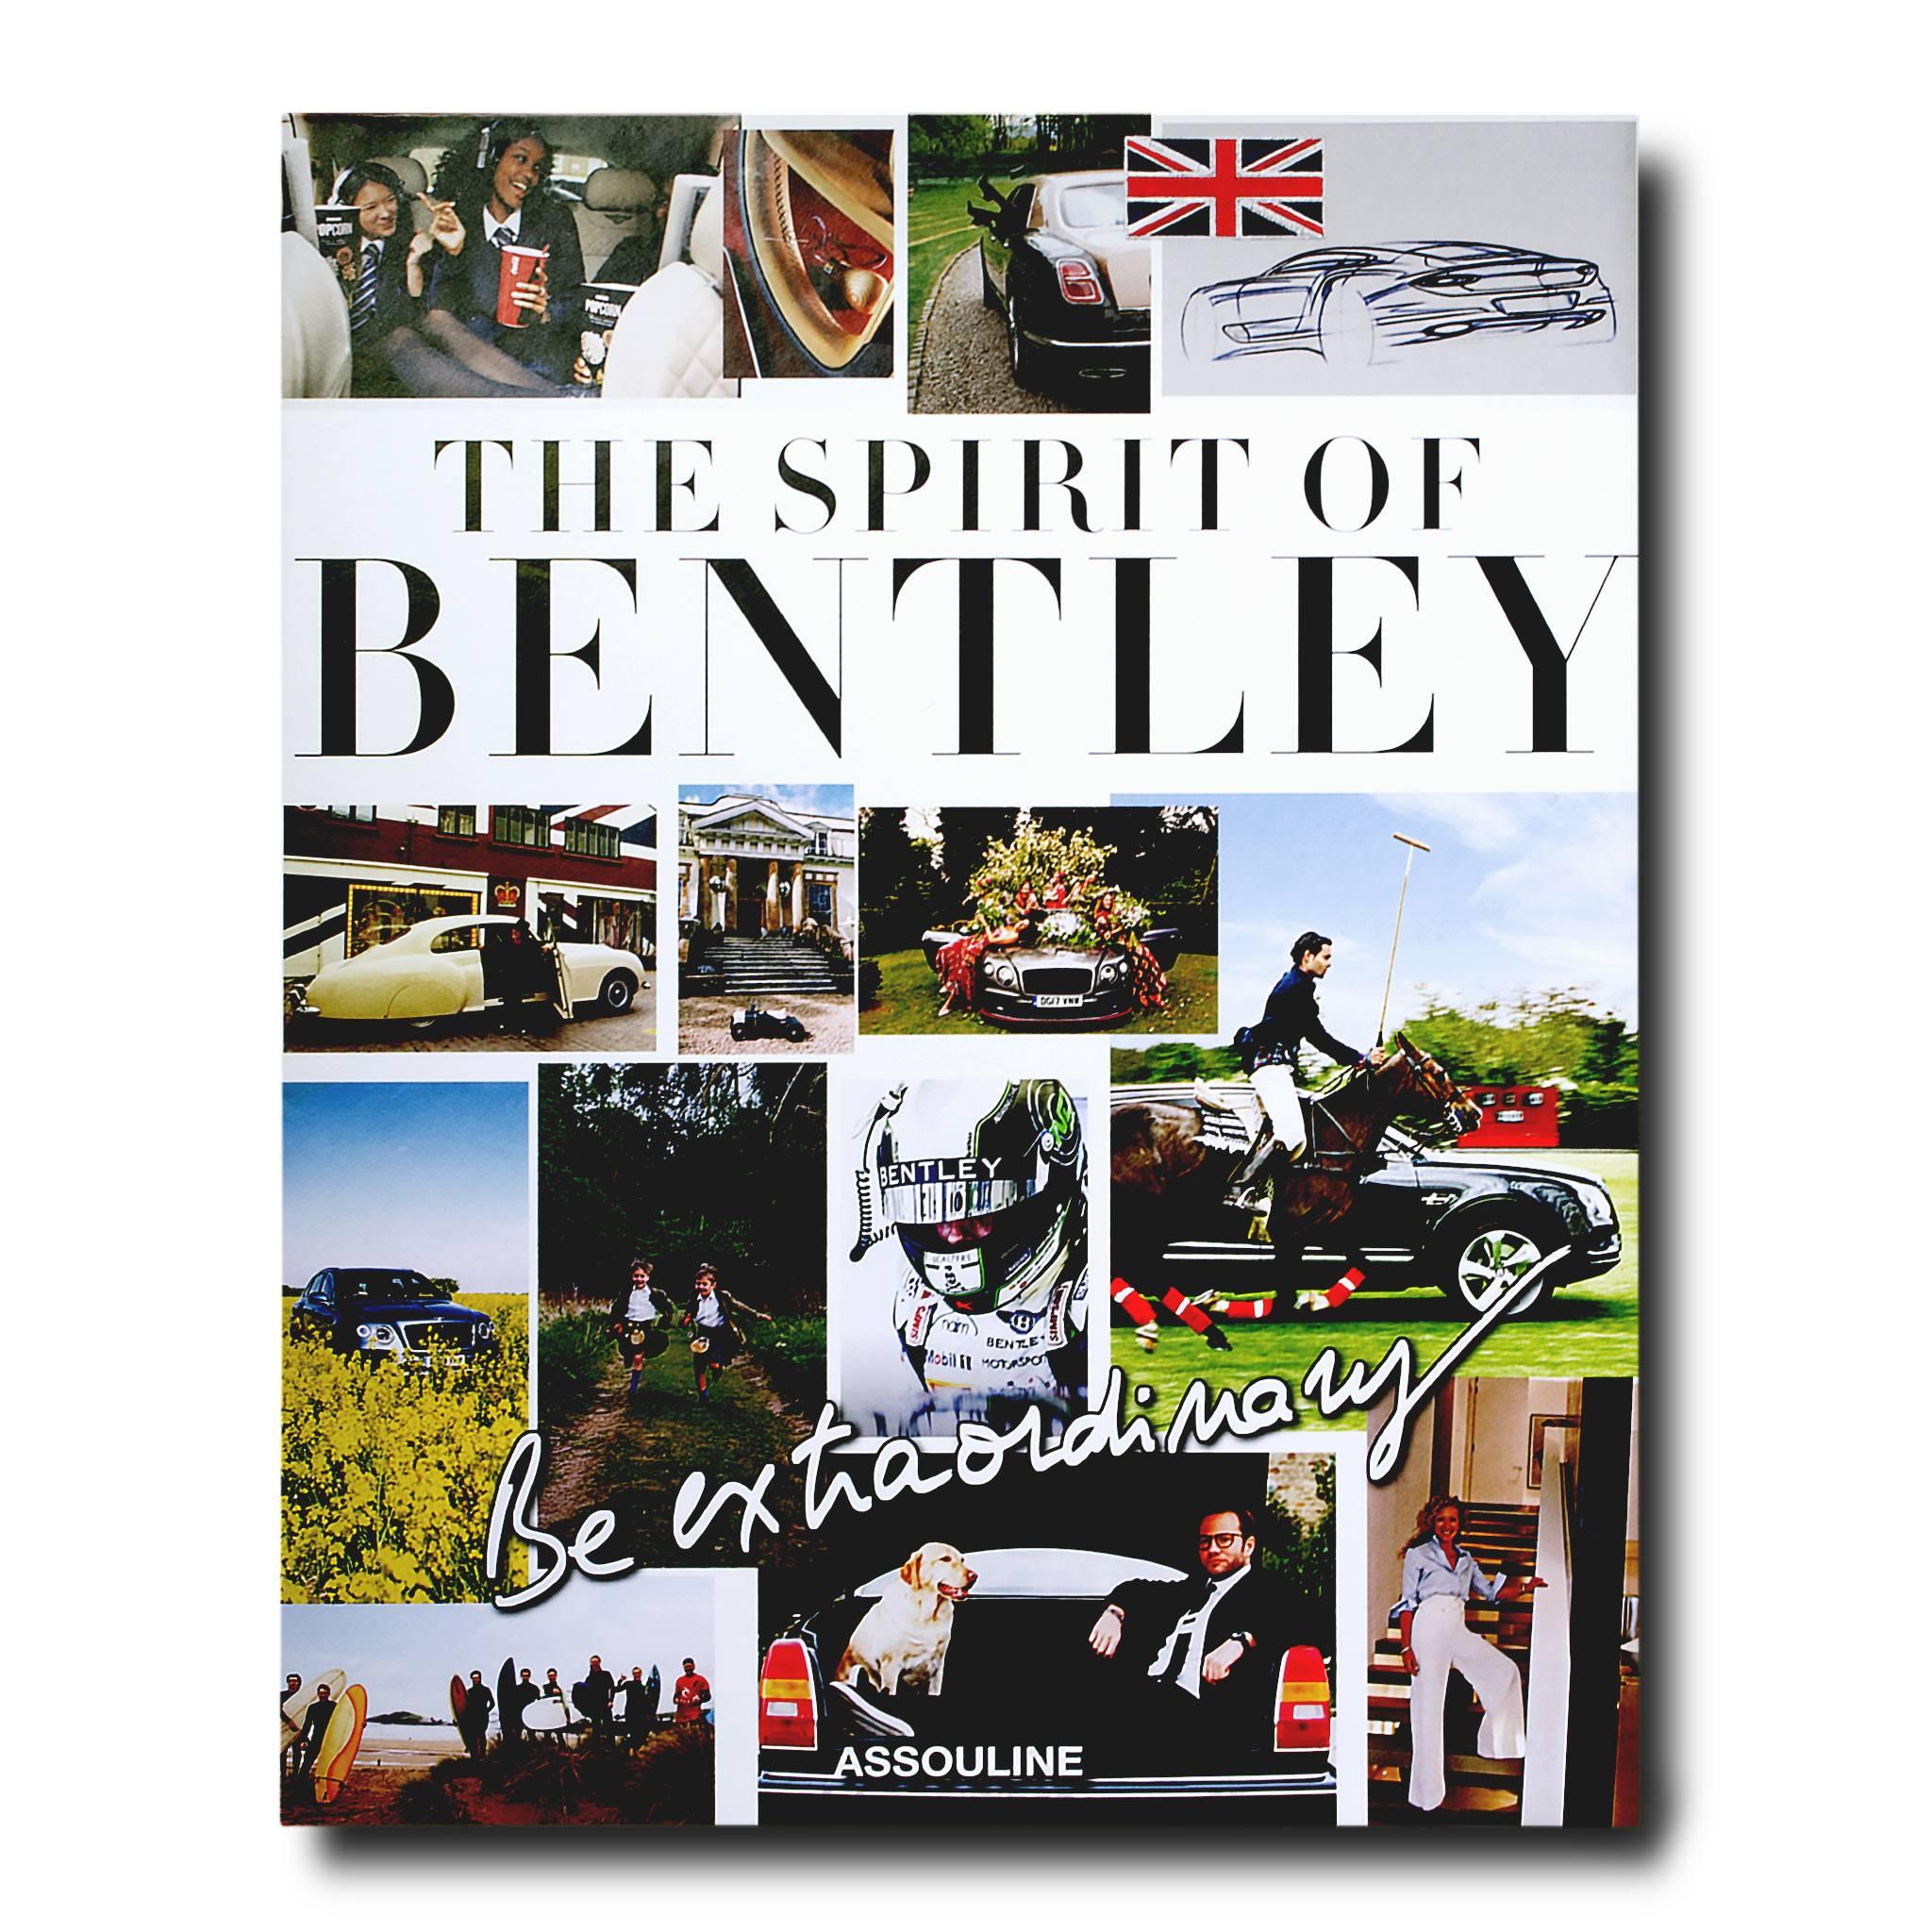 Now considered the most definitive British luxury car company, Bentley Motors Ltd was founded by Walter Owen Bentley in 1919 in Cricklewood, North London, under humble circumstances. Within that same year, the first car designed and built by the